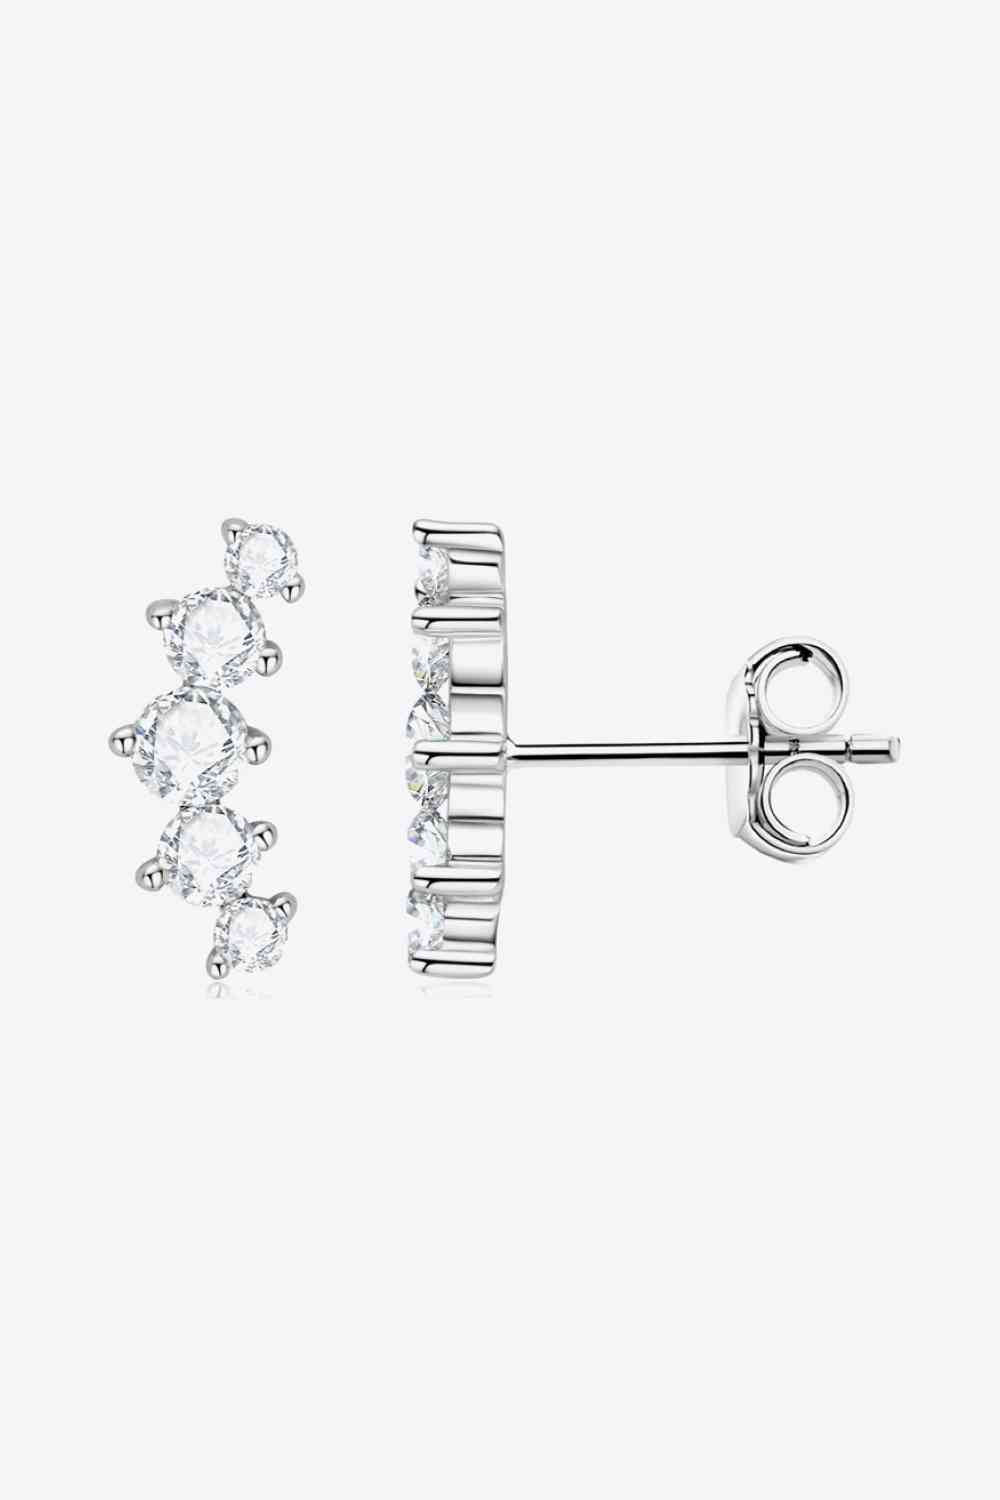 All You Need Moissanite Platinum-Plated Earrings - BEYOND